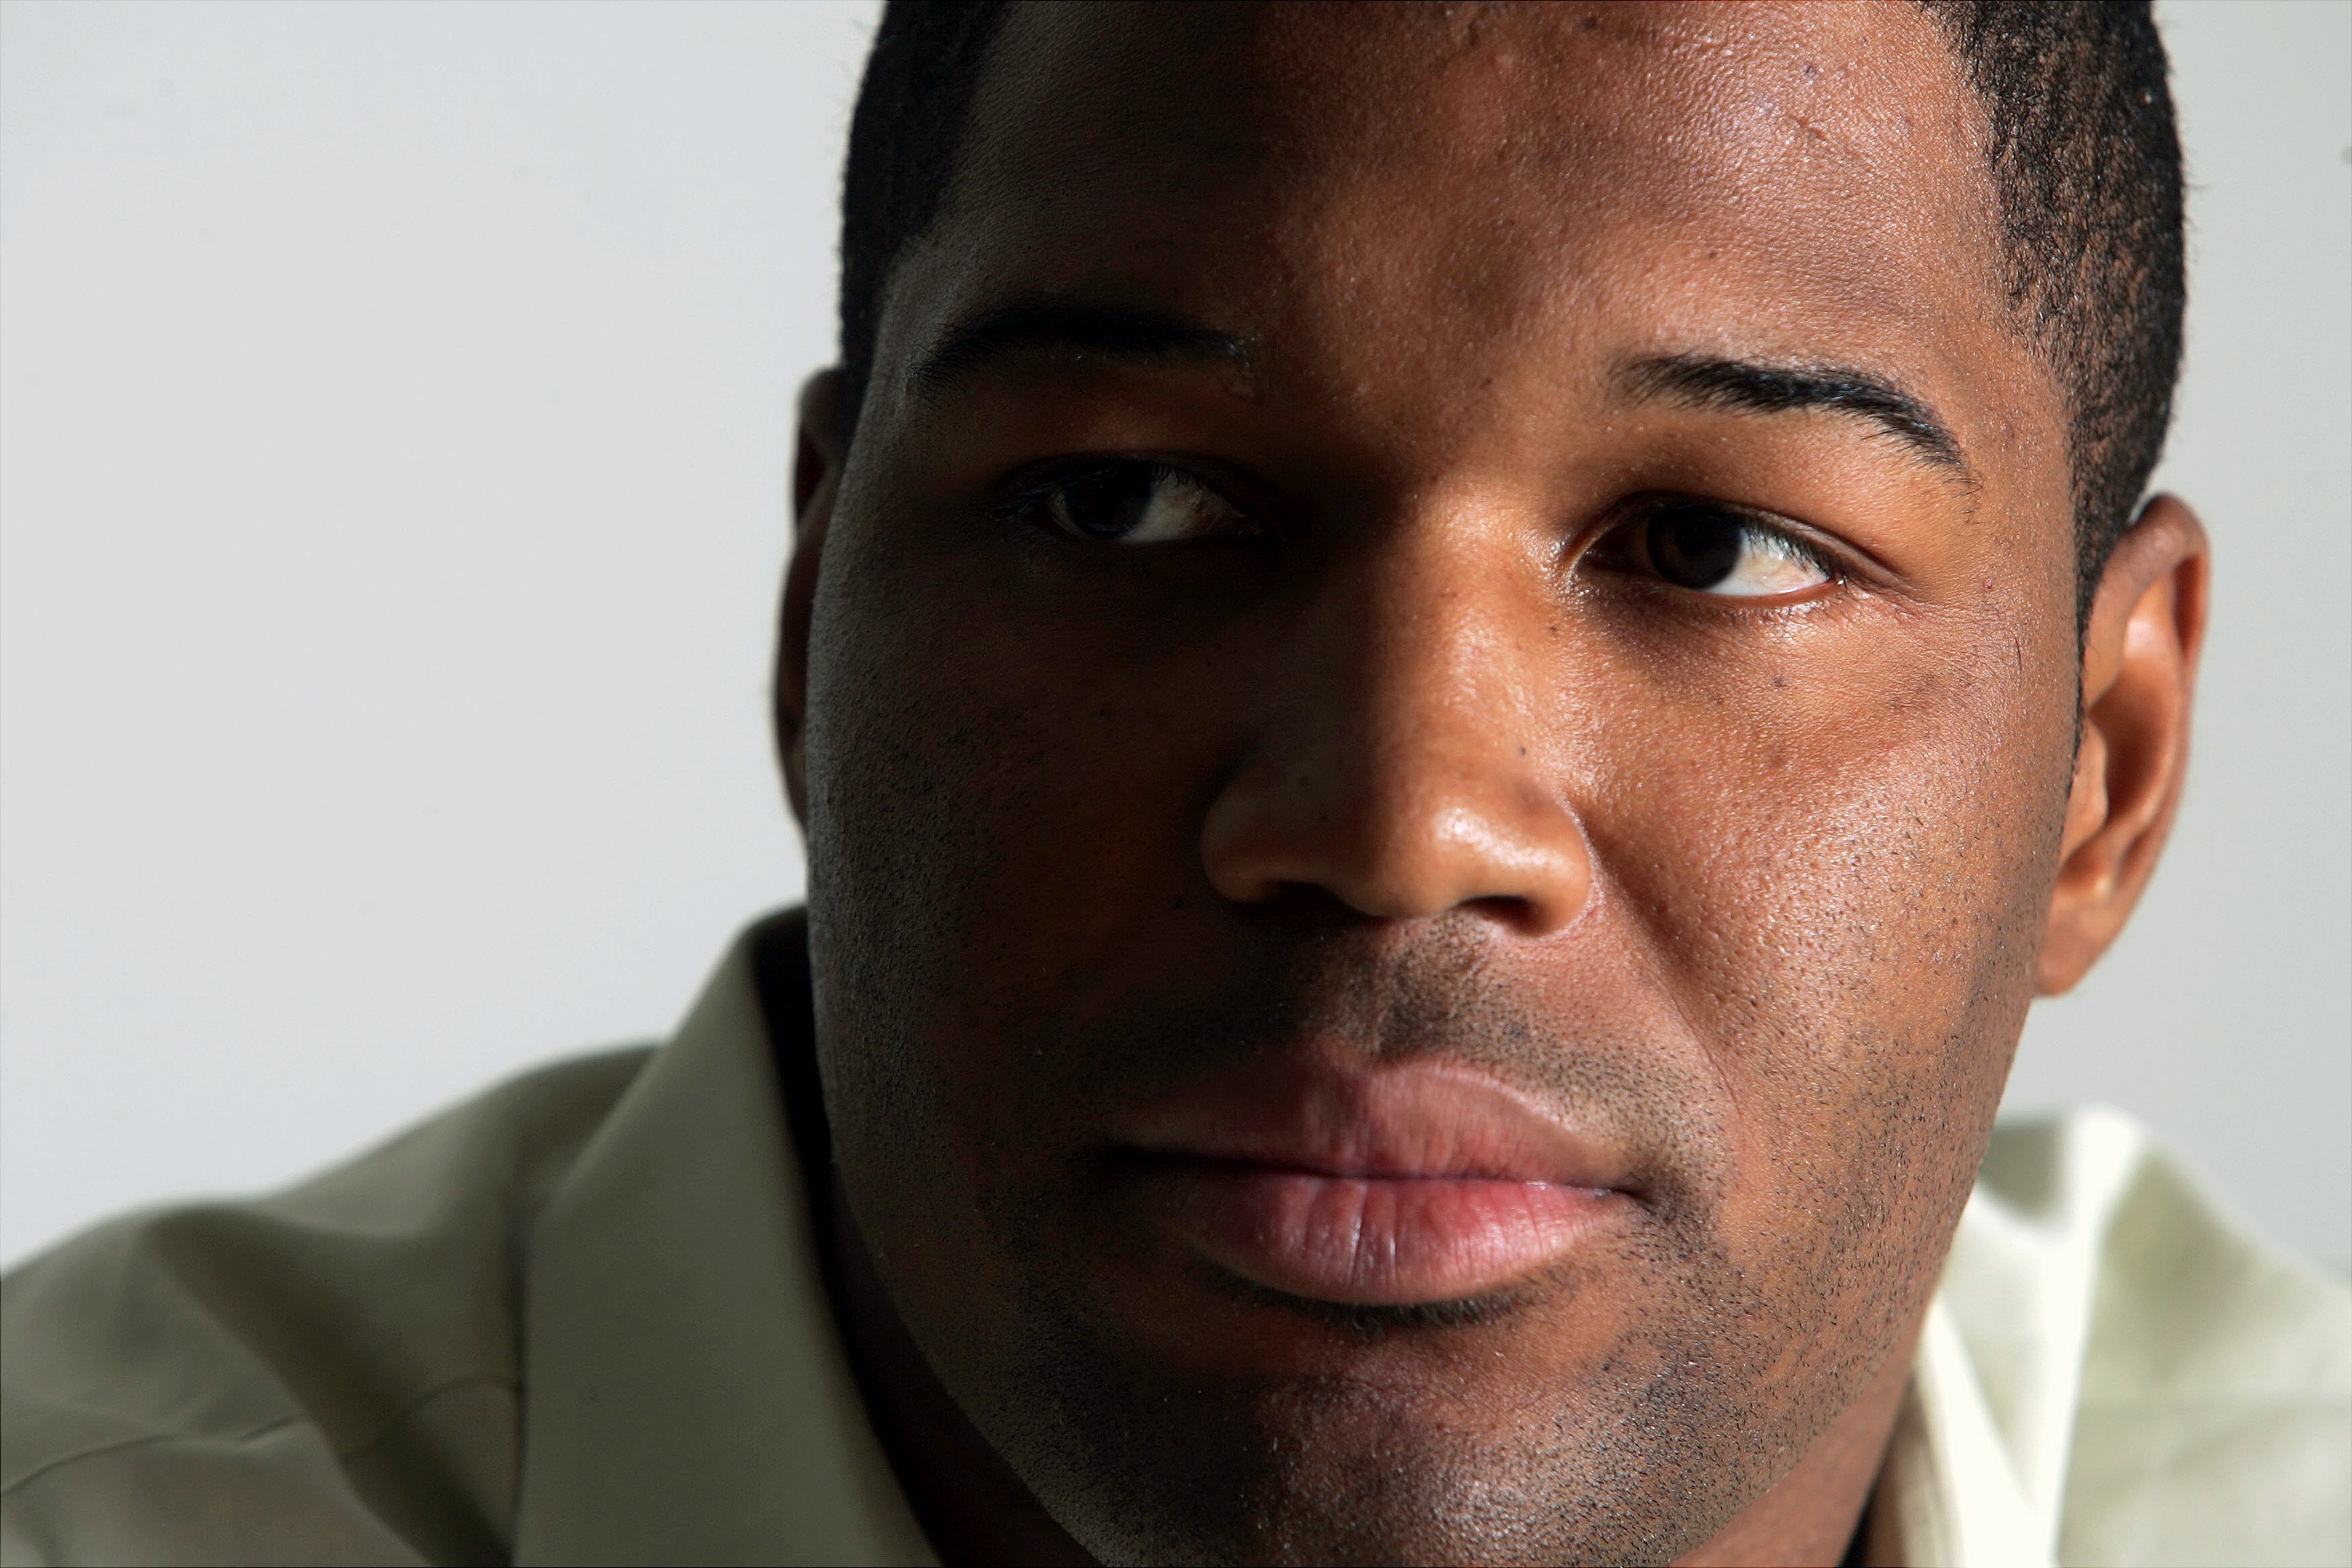 Michael Strahan speaks about his divorce battle at his publicist's Chelsea office on March 18, 2005. | Source: Michael Appleton/NY Daily News Archive/Getty Images